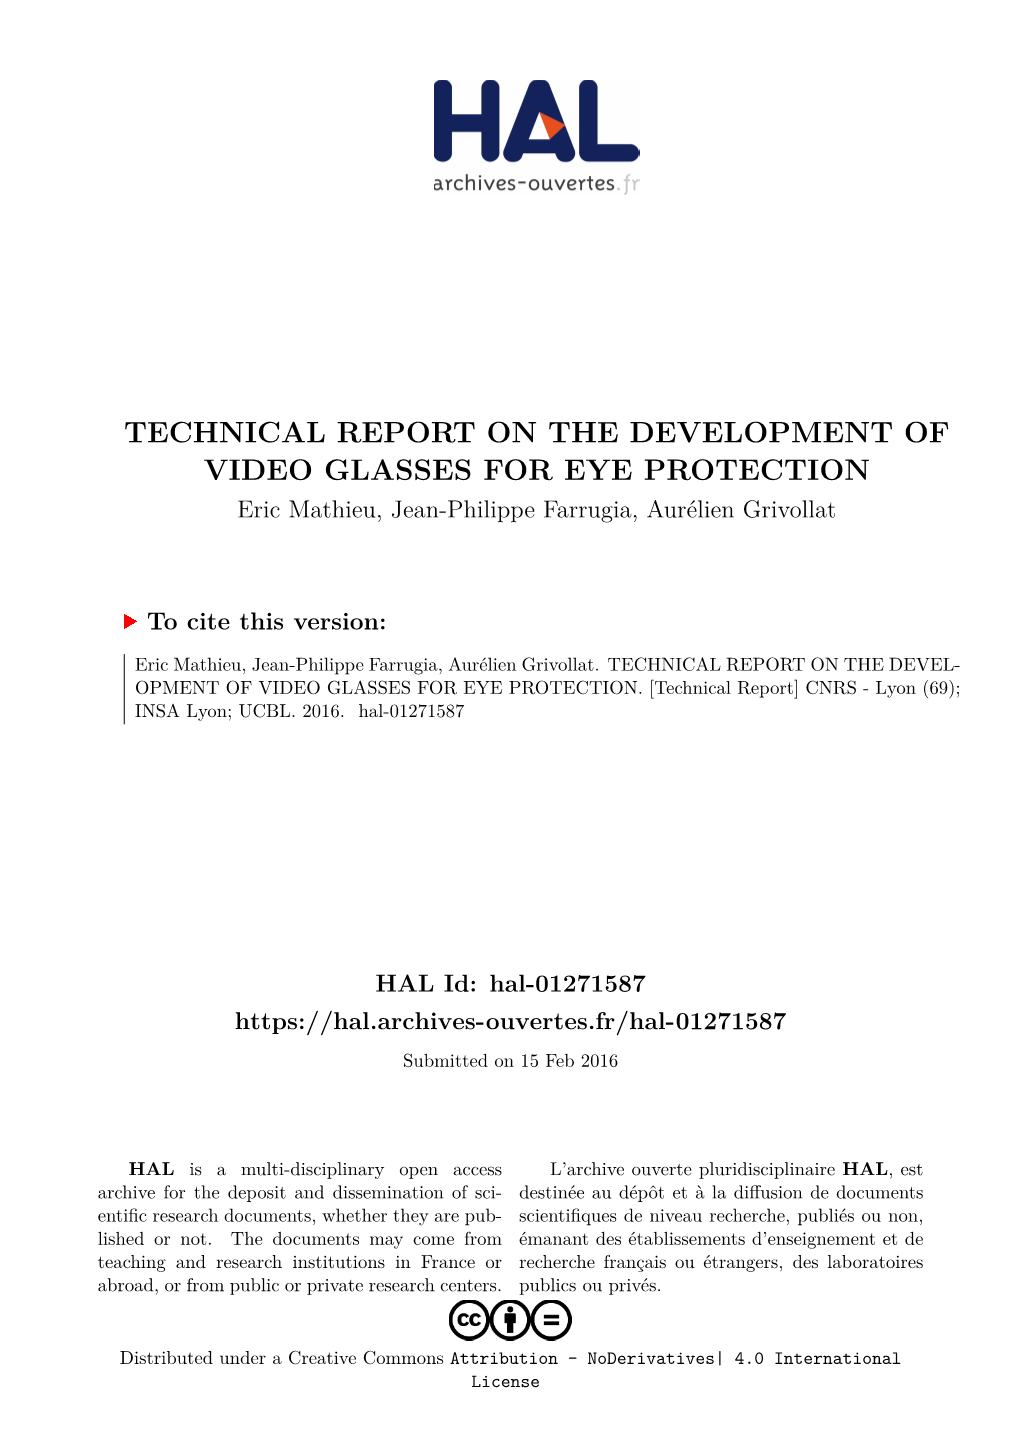 TECHNICAL REPORT on the DEVELOPMENT of VIDEO GLASSES for EYE PROTECTION Eric Mathieu, Jean-Philippe Farrugia, Aurélien Grivollat